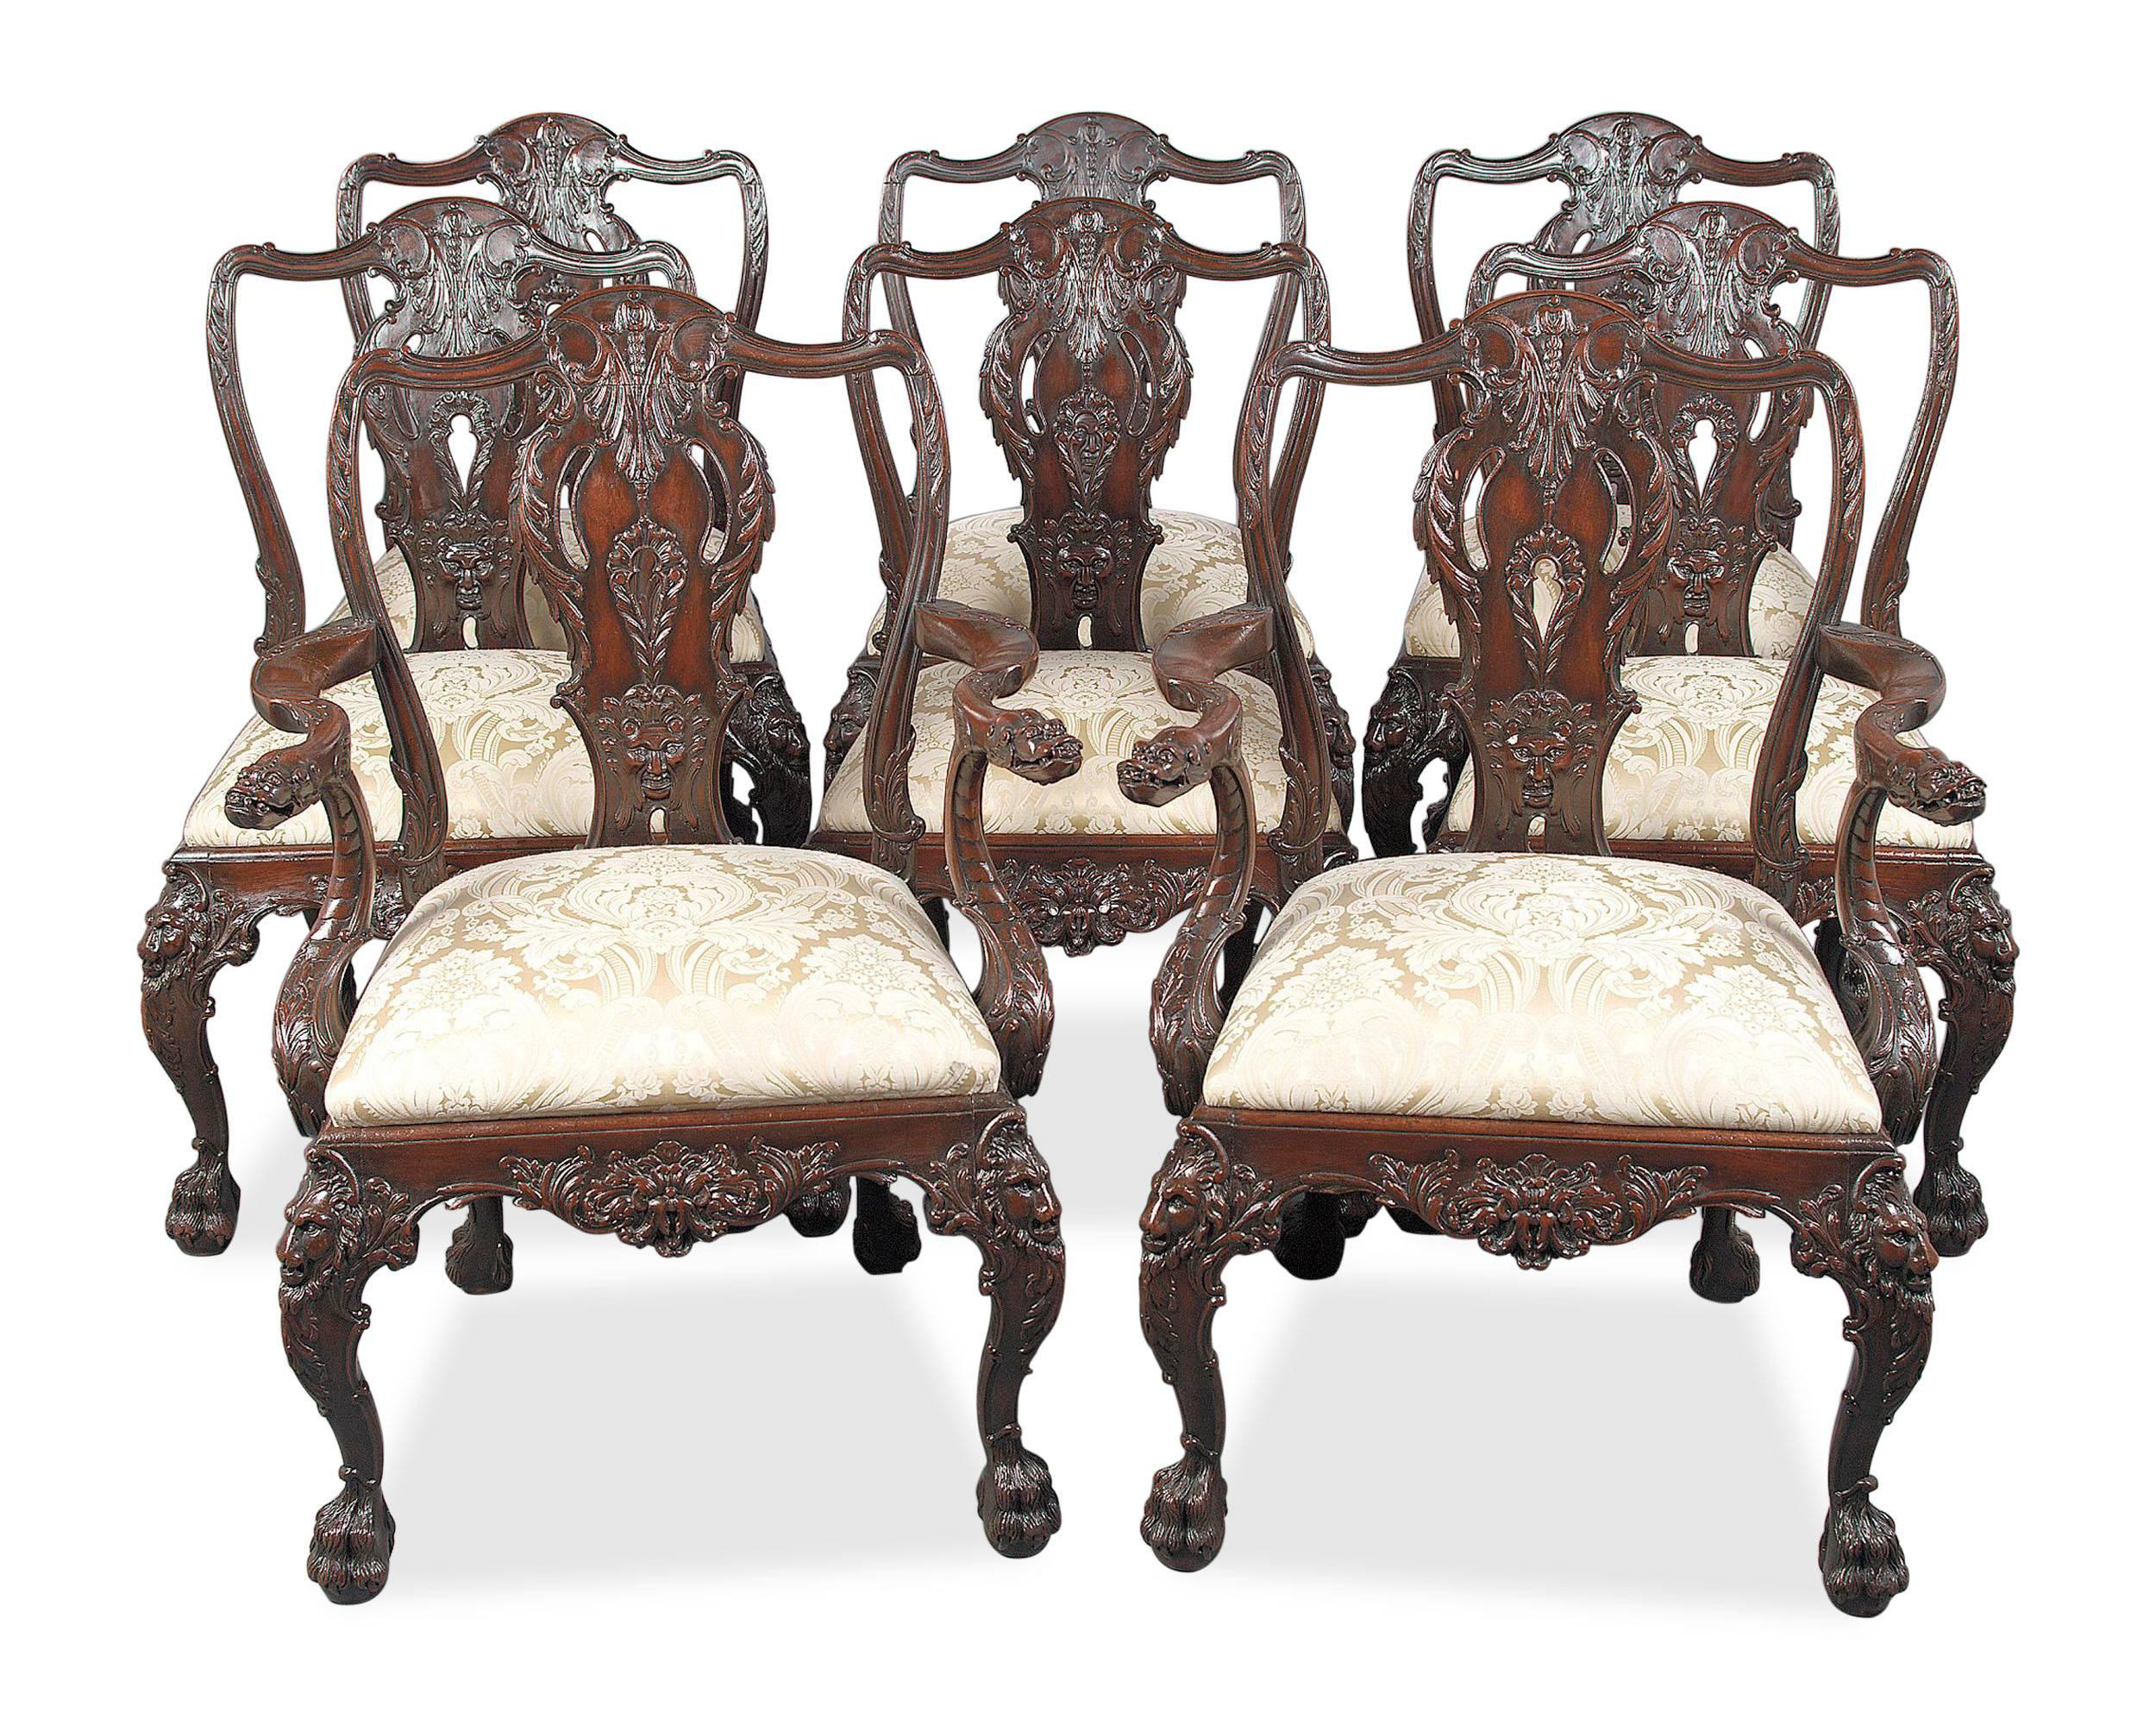 Luxuriously carved, this wonderful set of eight English Victorian antique dining chairs is patterned after the 18th-century design by important furniture maker Giles Grendey (1693-1780) of London. The serpentine crests, leaves, satyr and lion masks,